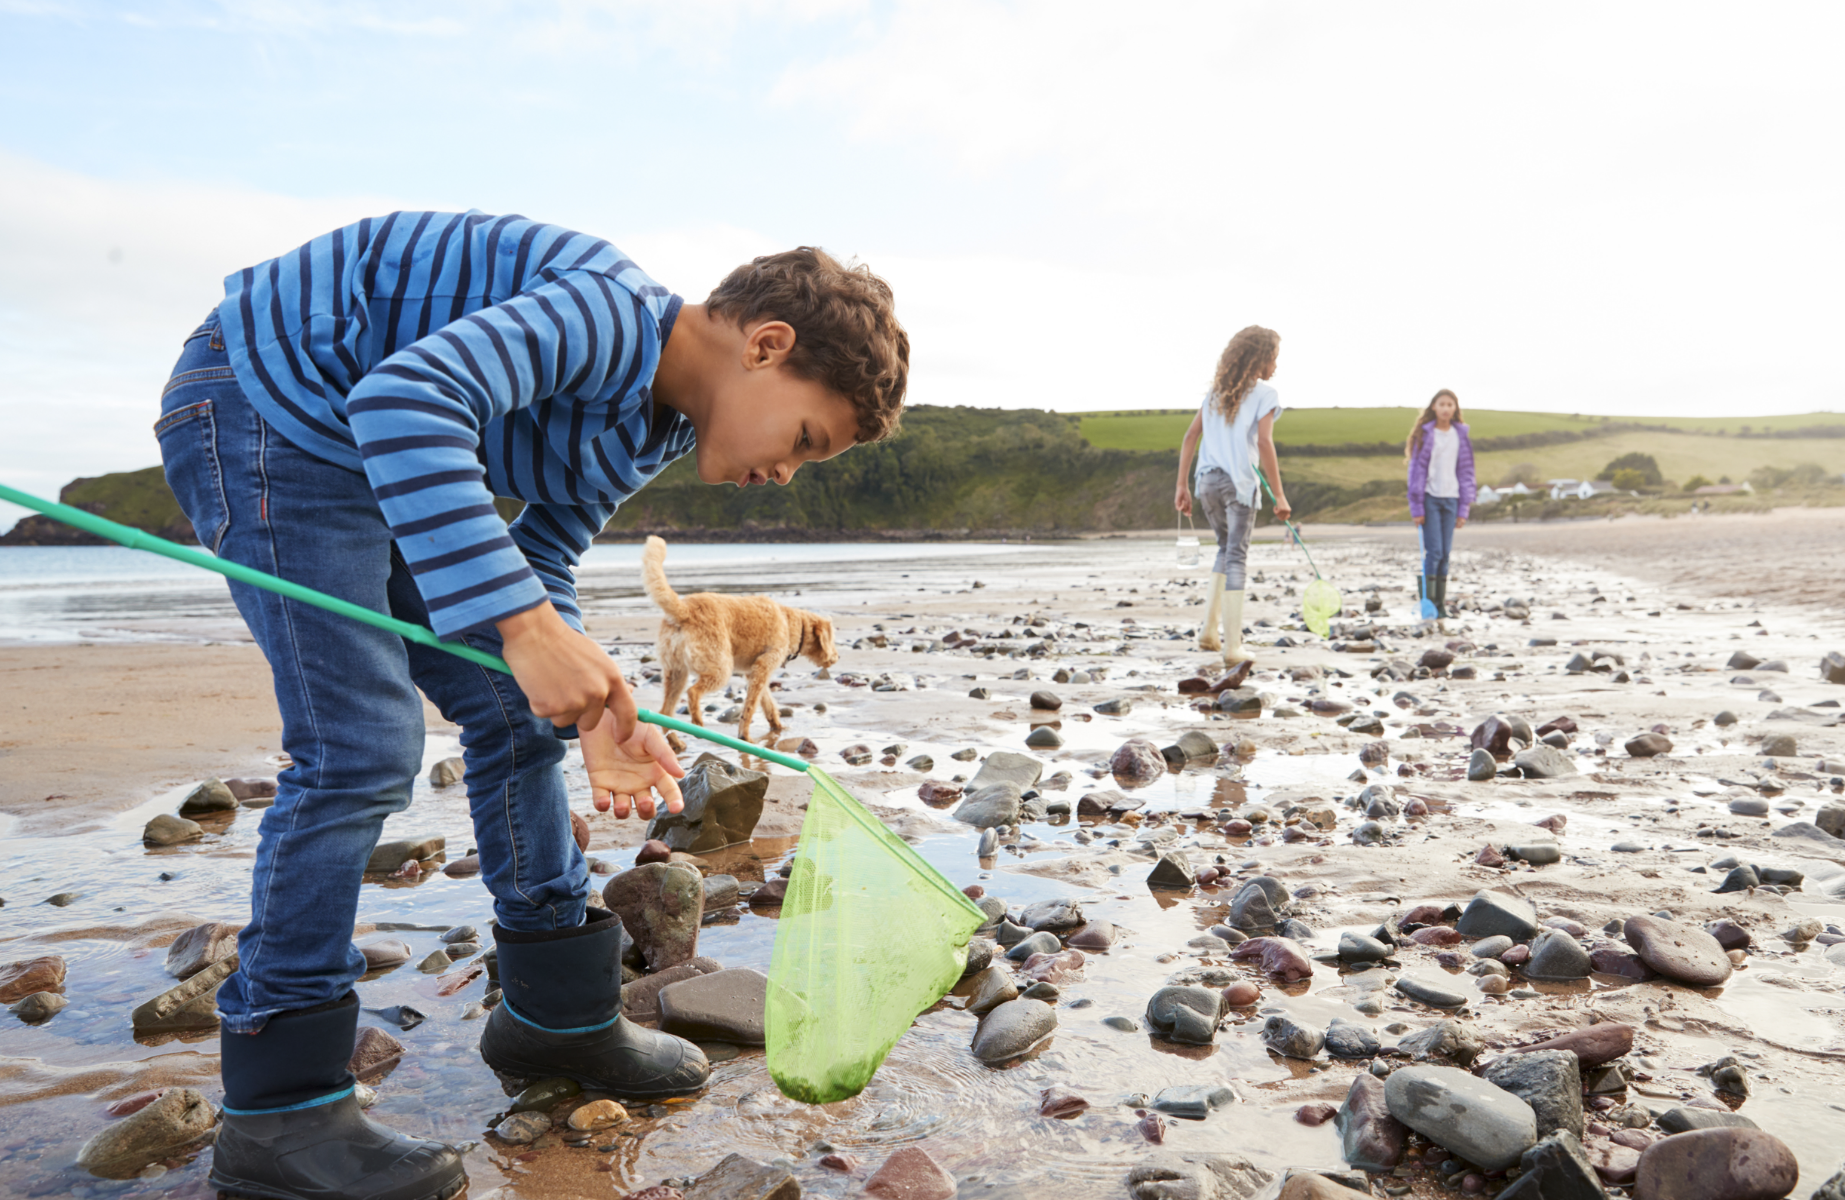 Children rock-pooling on the beach